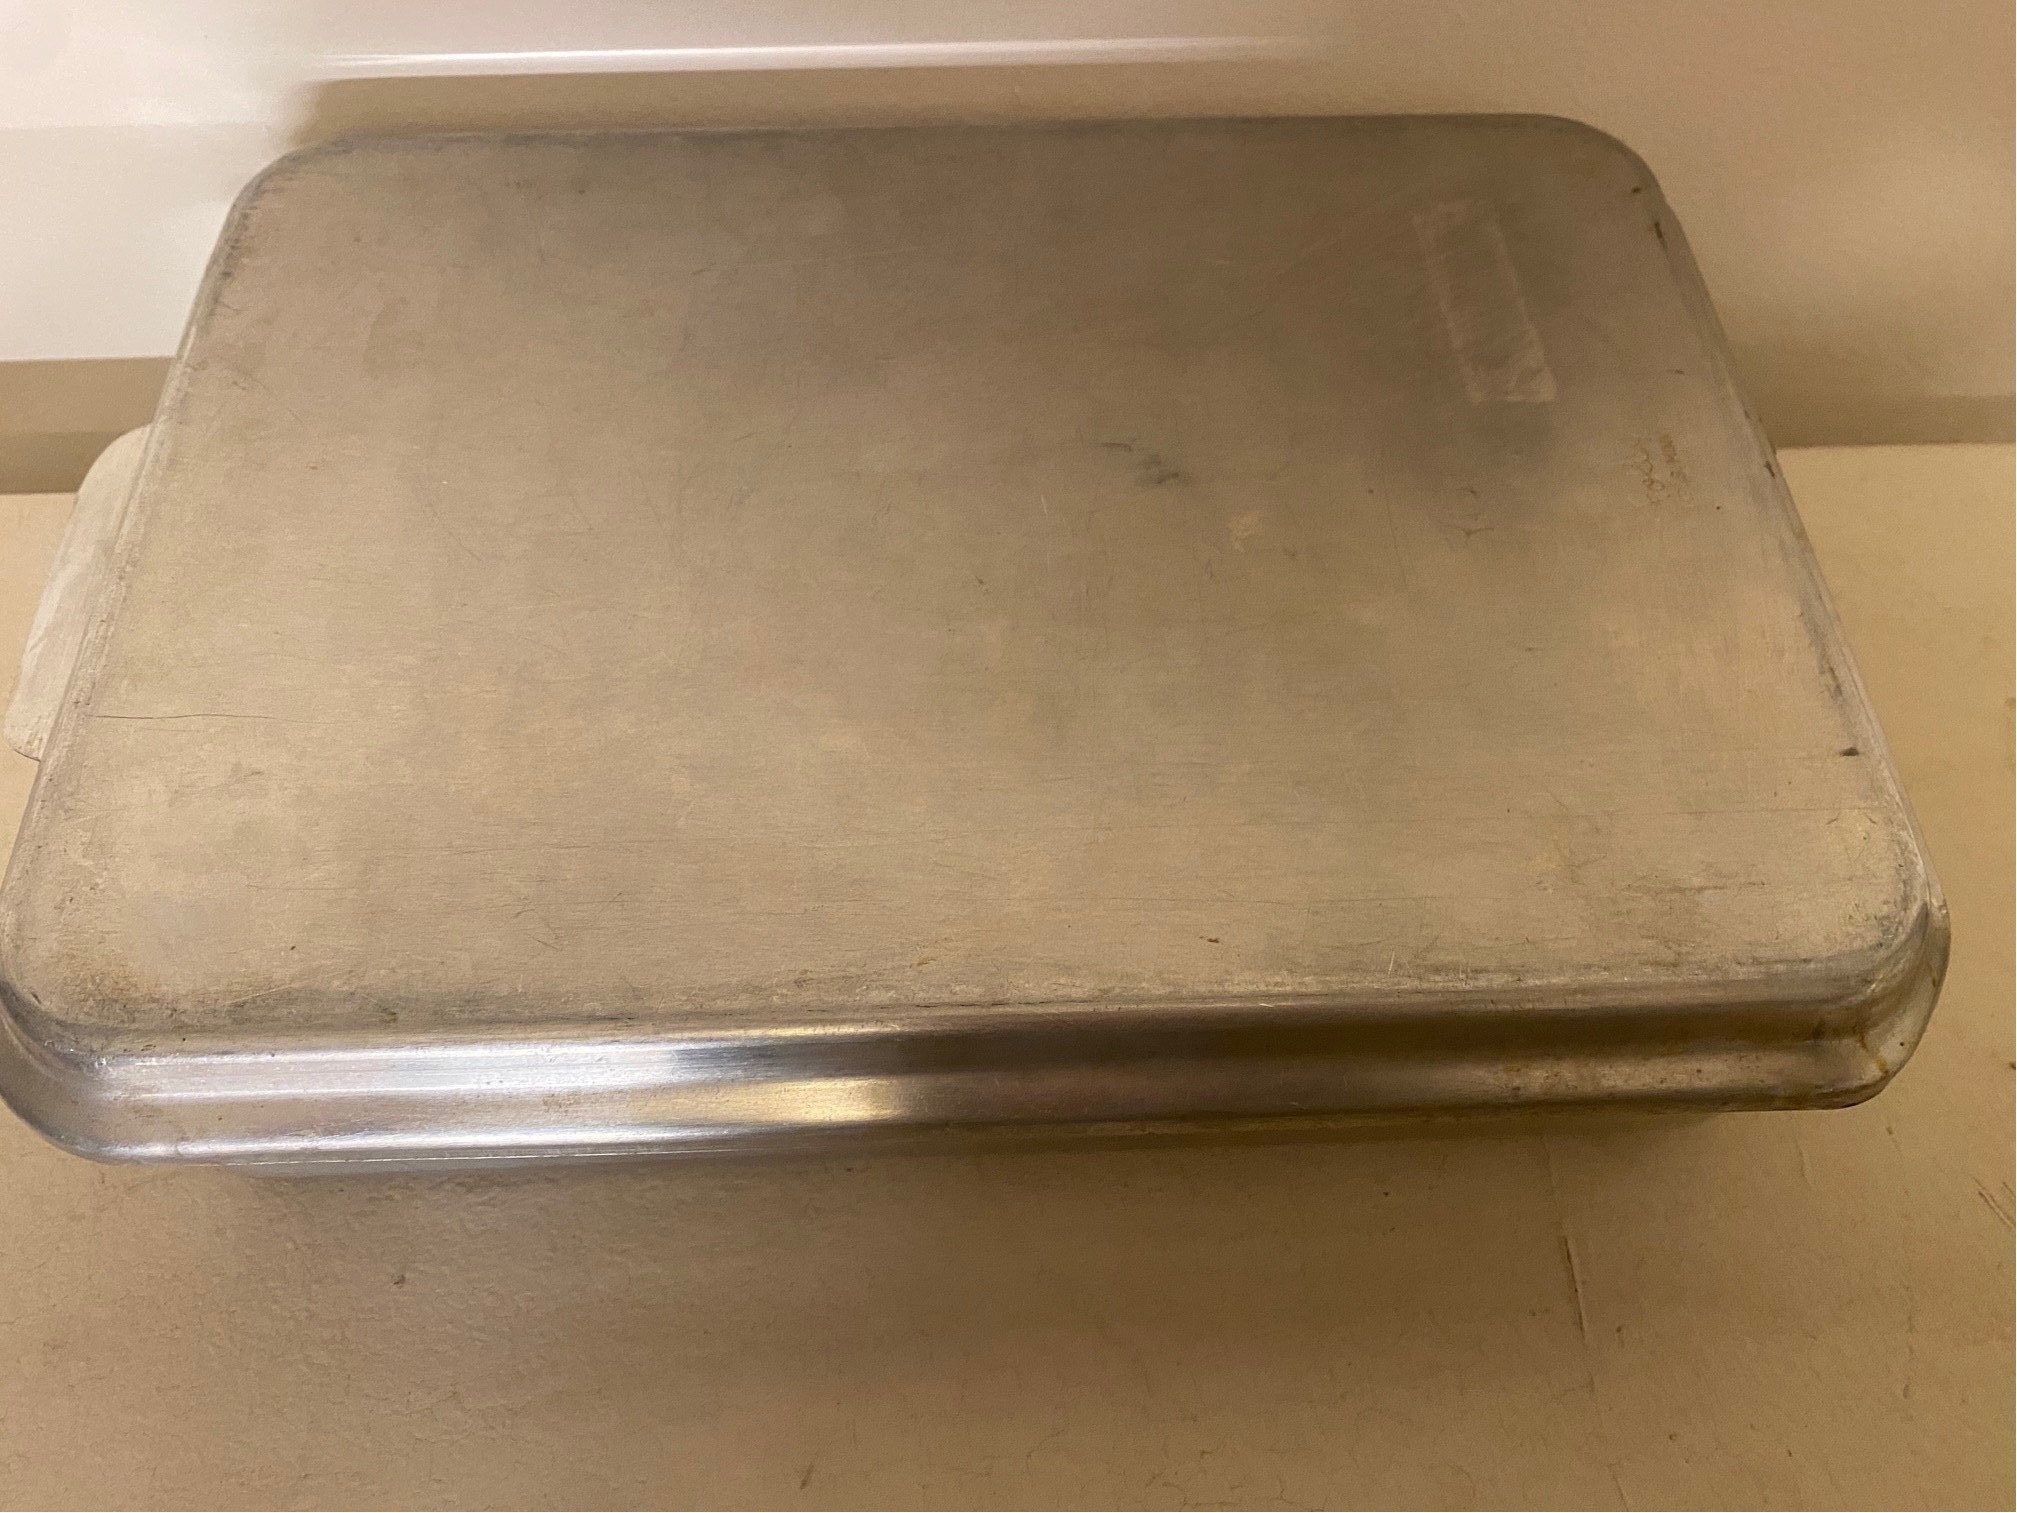 Vintage Foley Metal 9.25x13 Cake Pan With Cover 